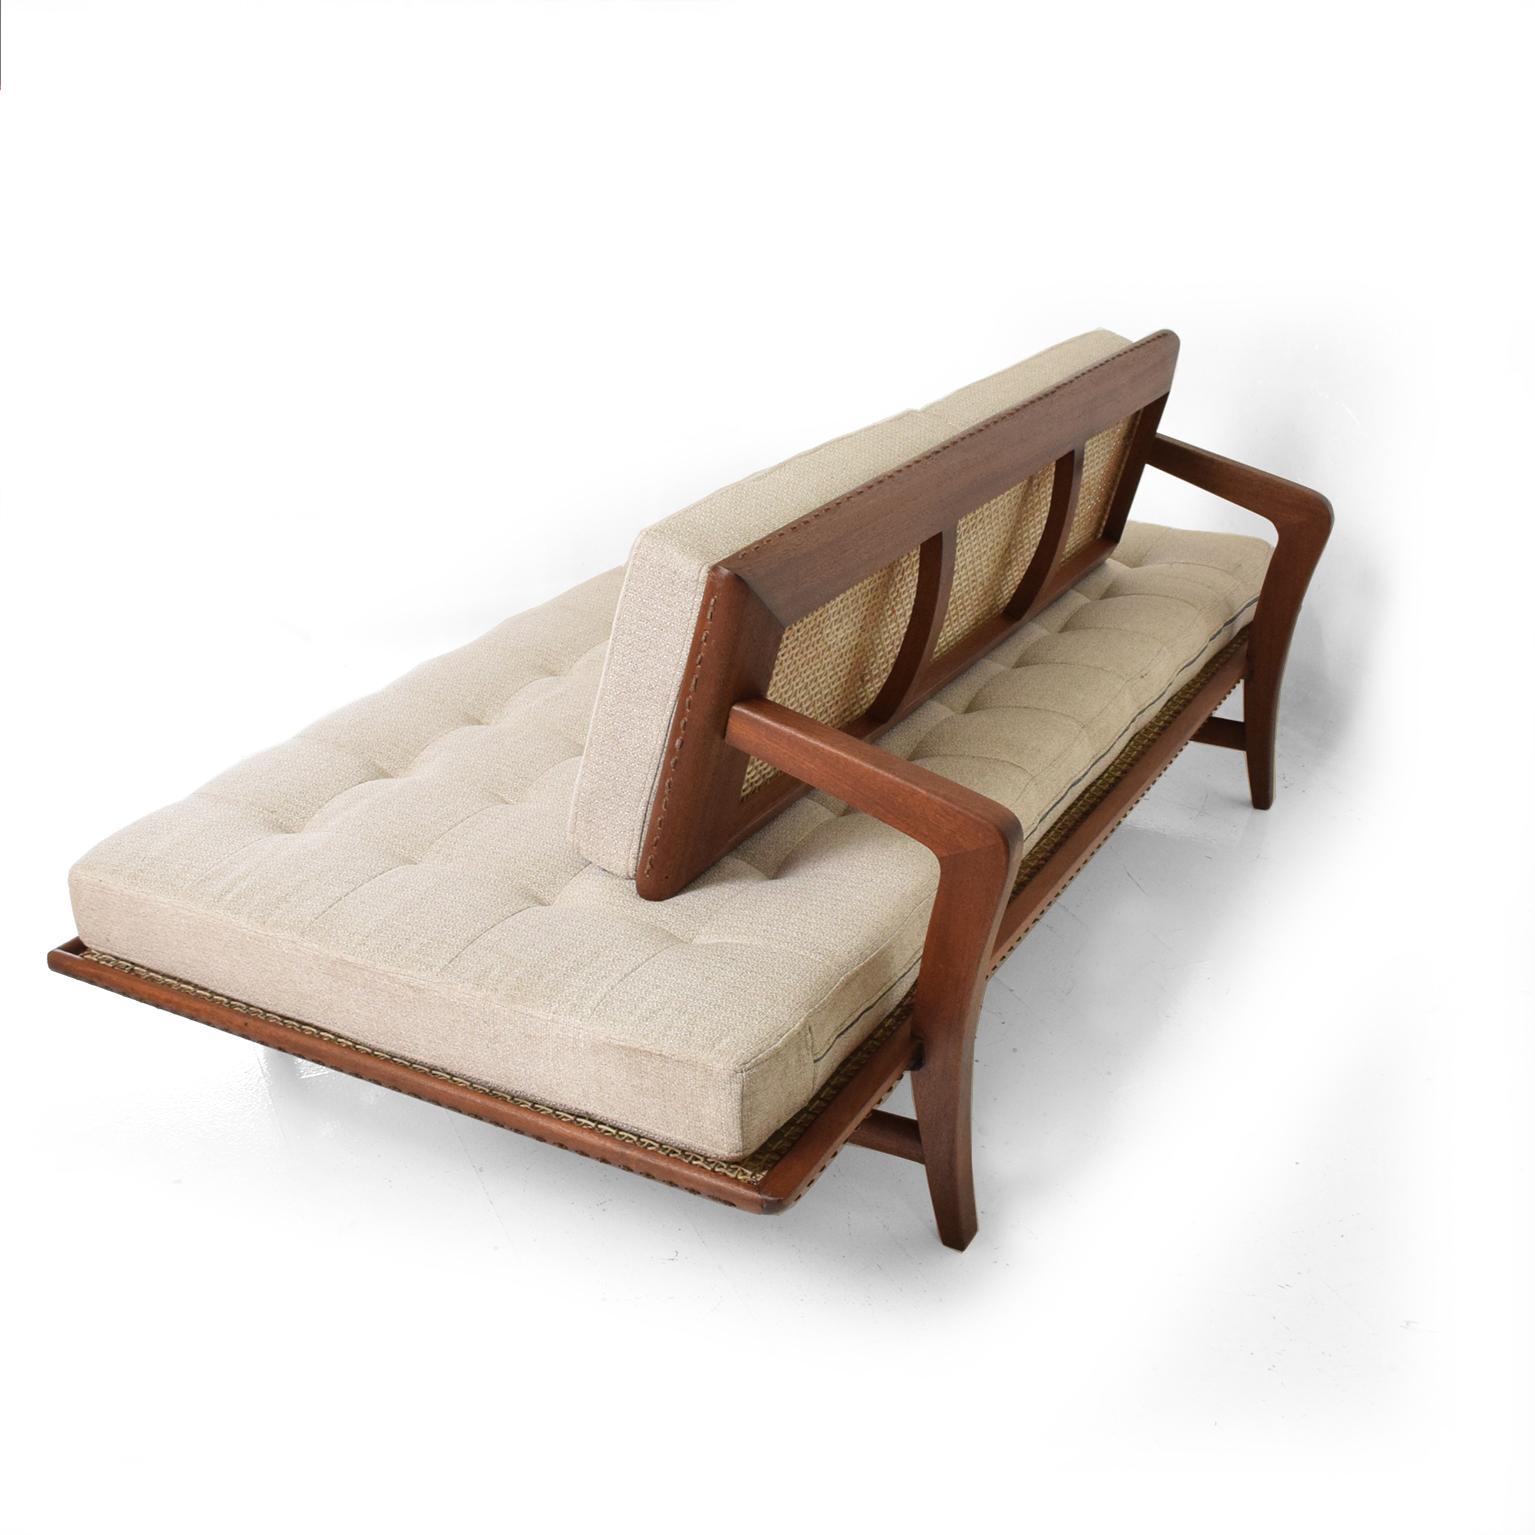 Mid-20th Century Mexican Modernist Chaise Lounge Daybed by Charles Allen, Regil de Yucatian